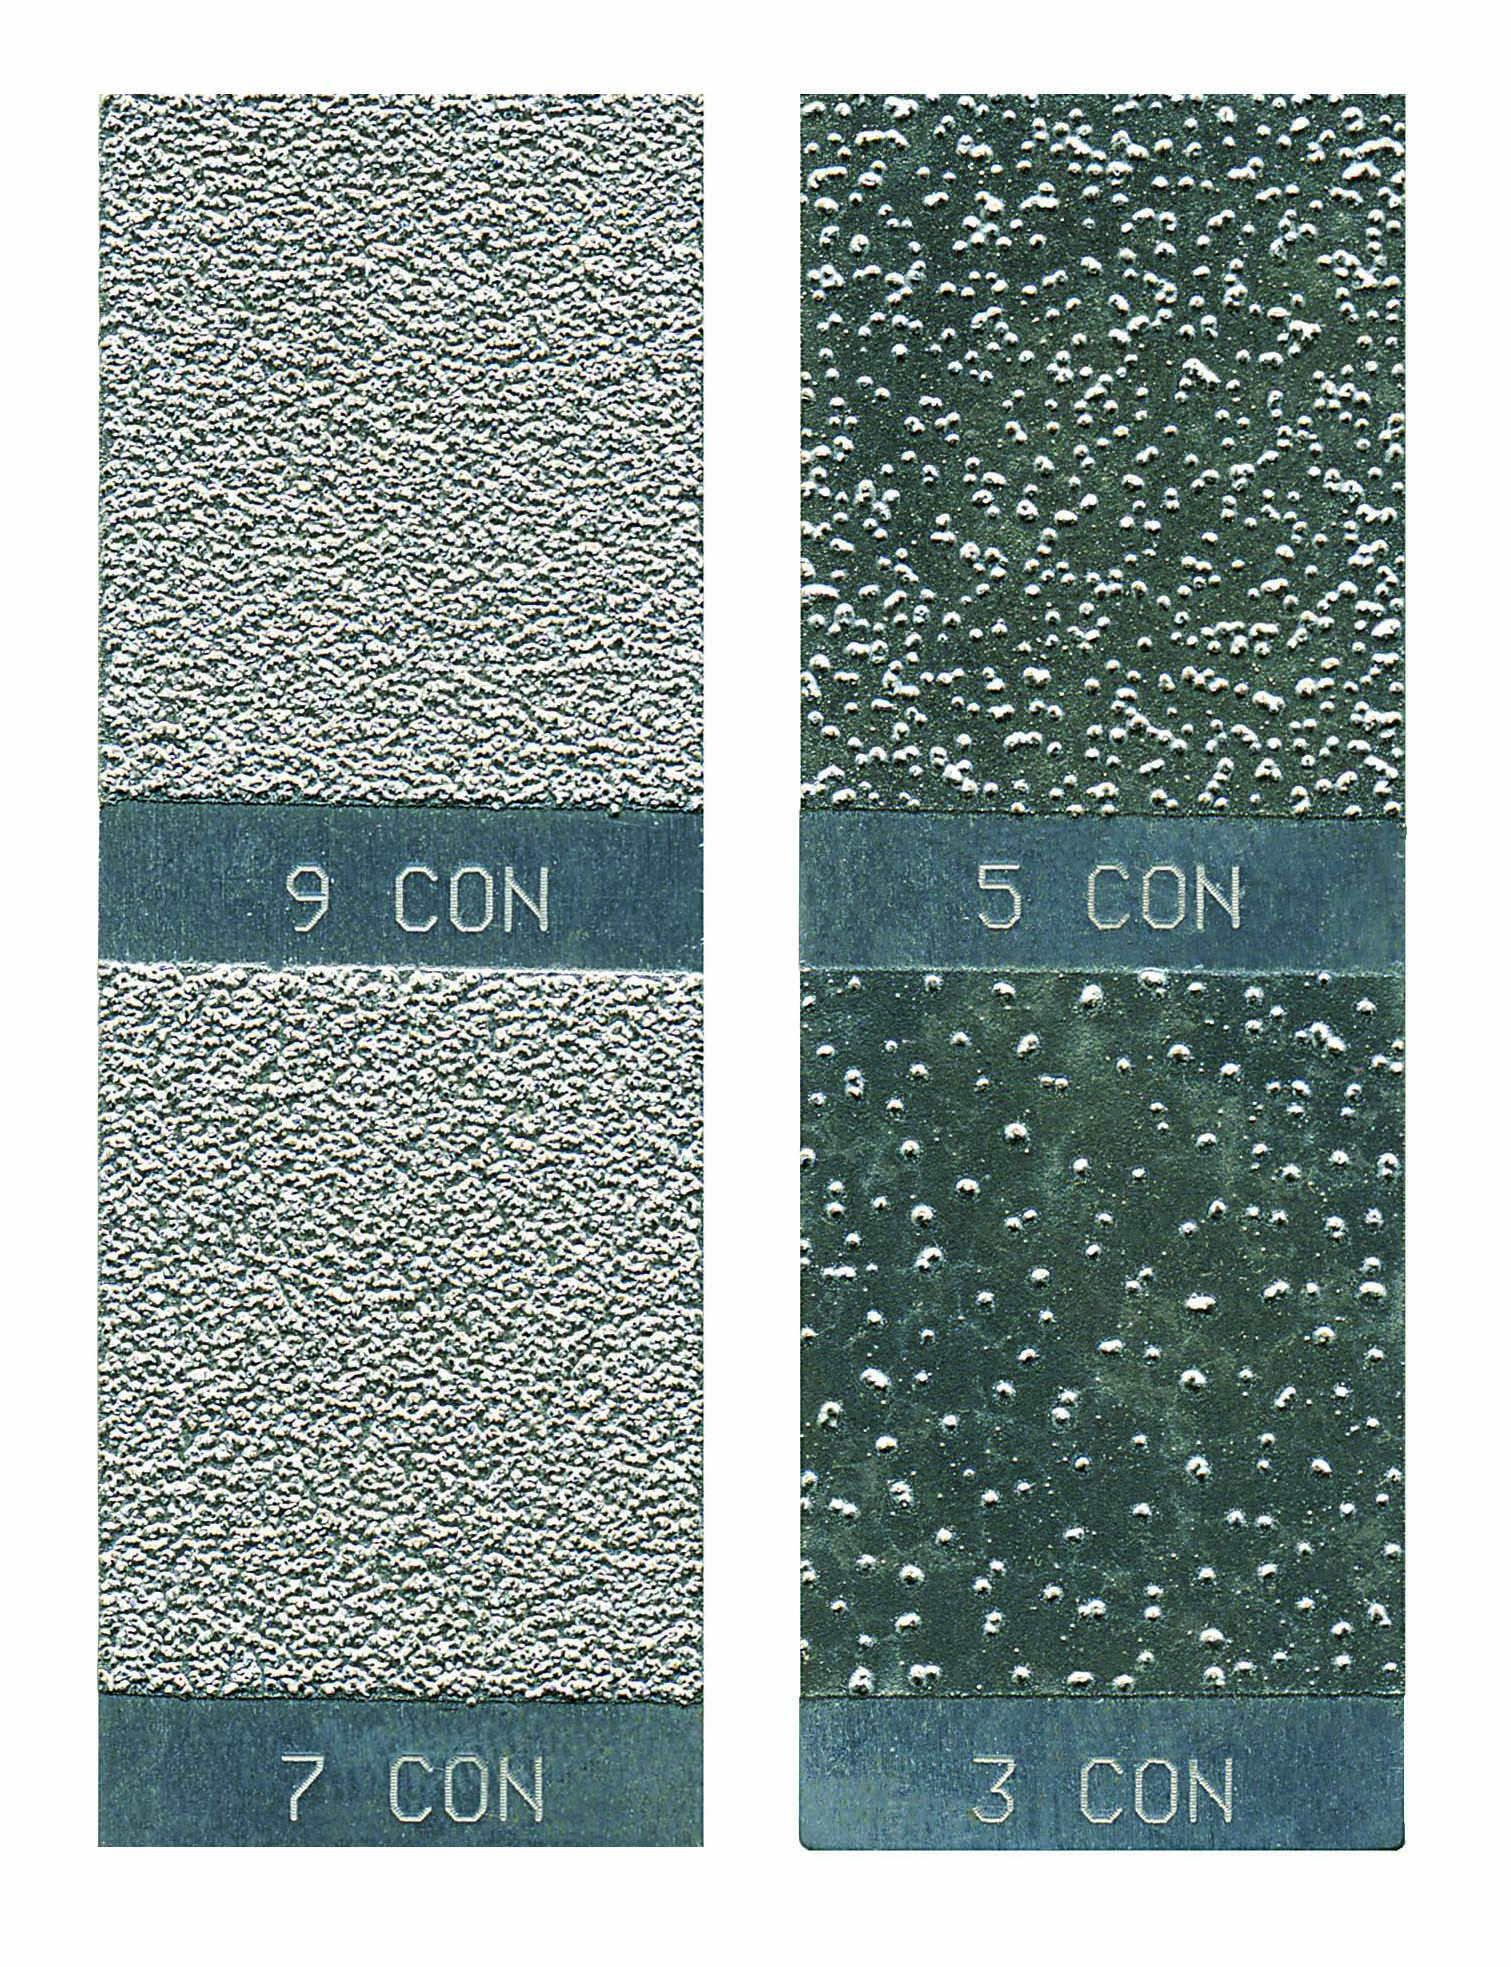 Examples of braze bond concentrations are displayed.